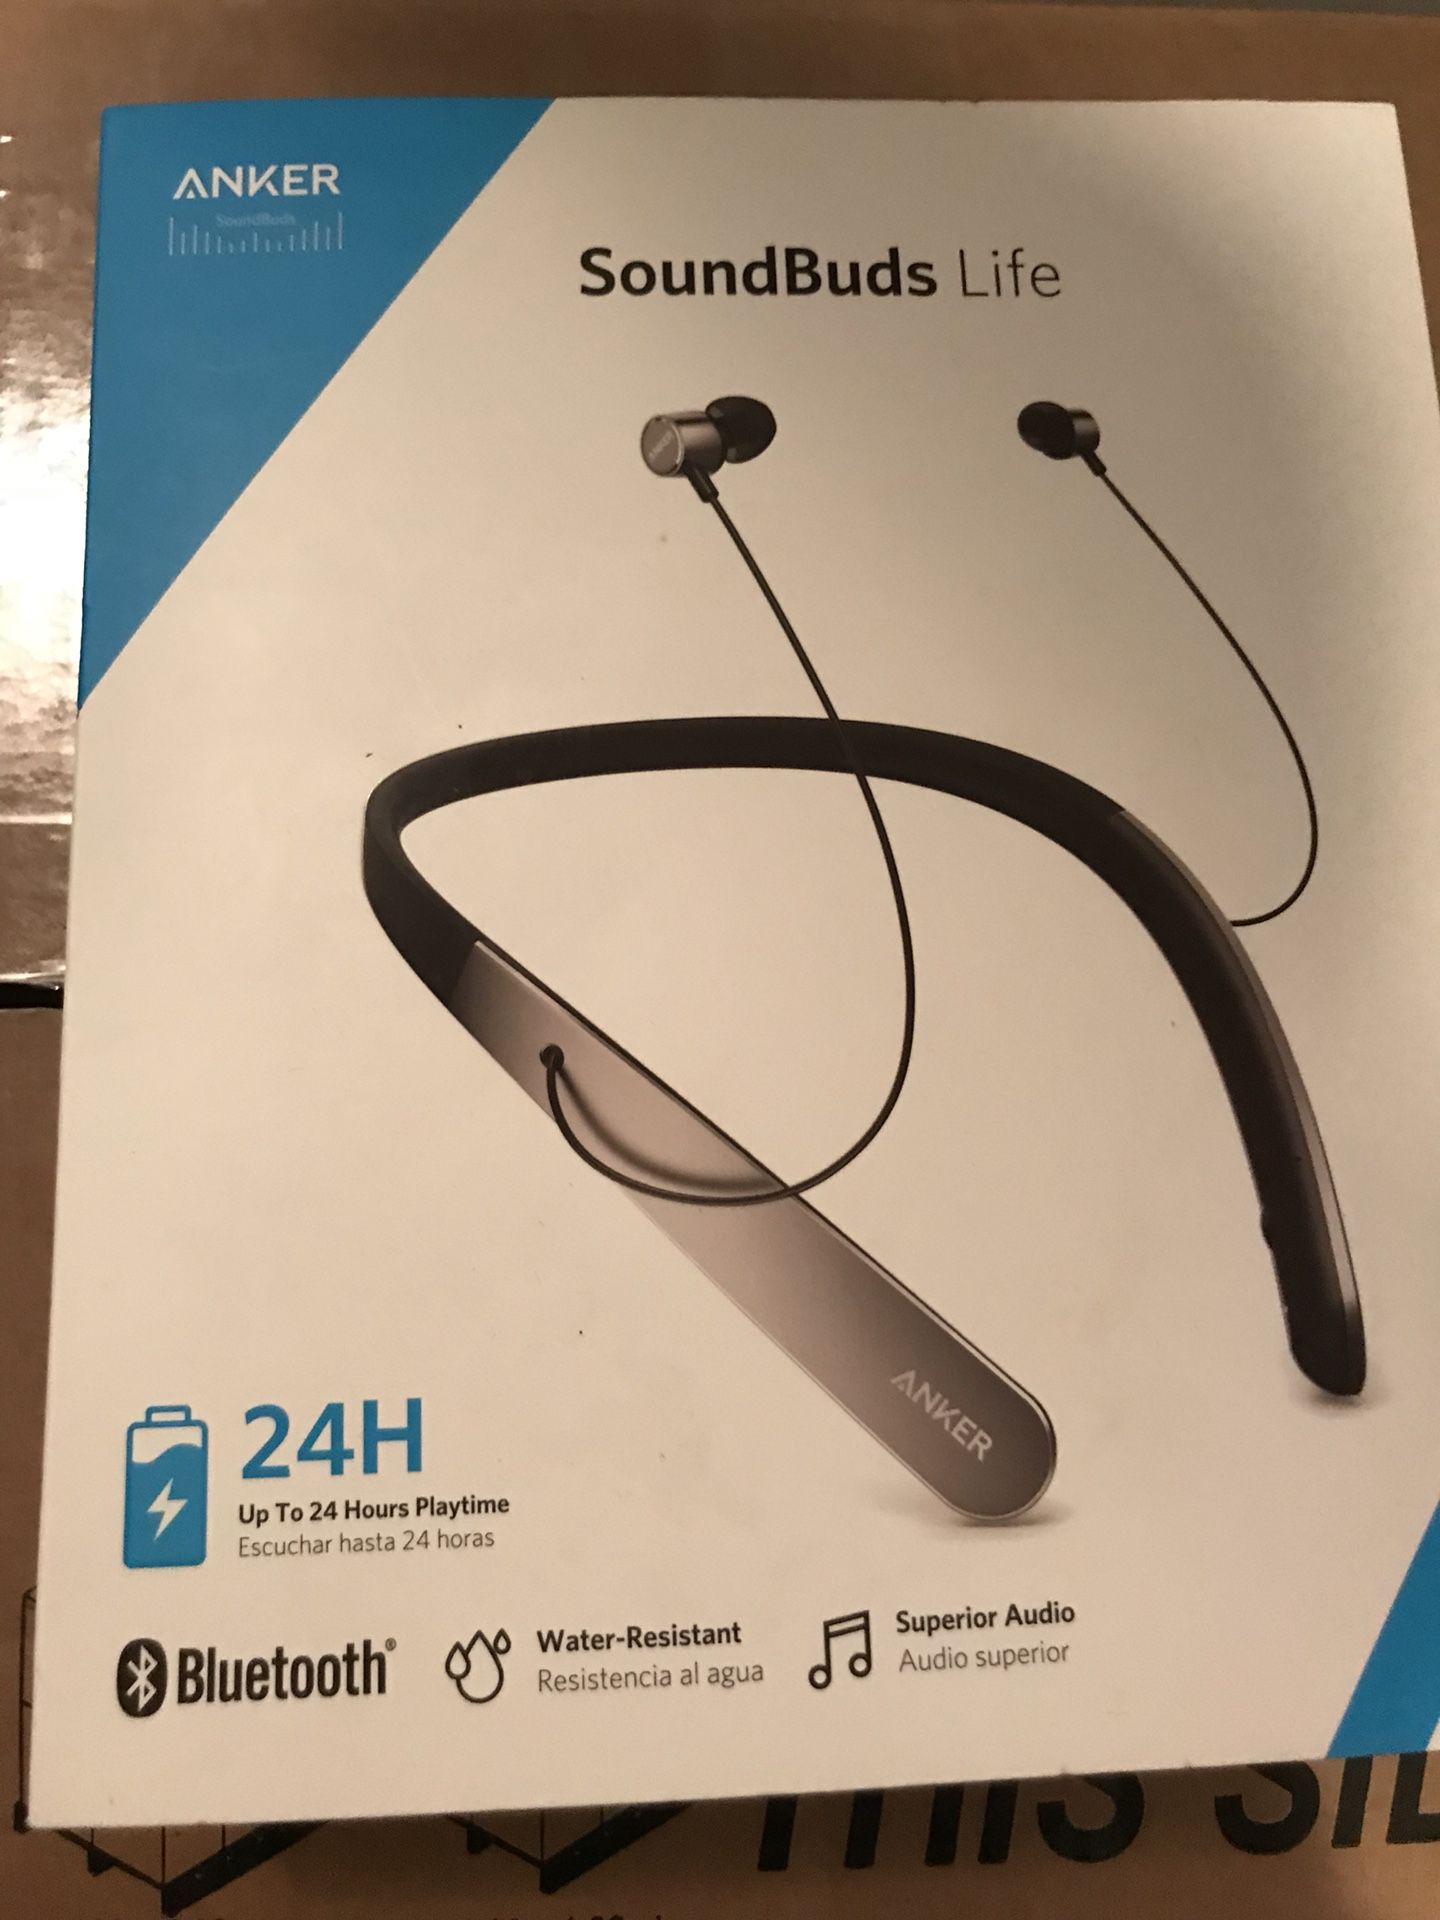 Soundbuds life by Anker